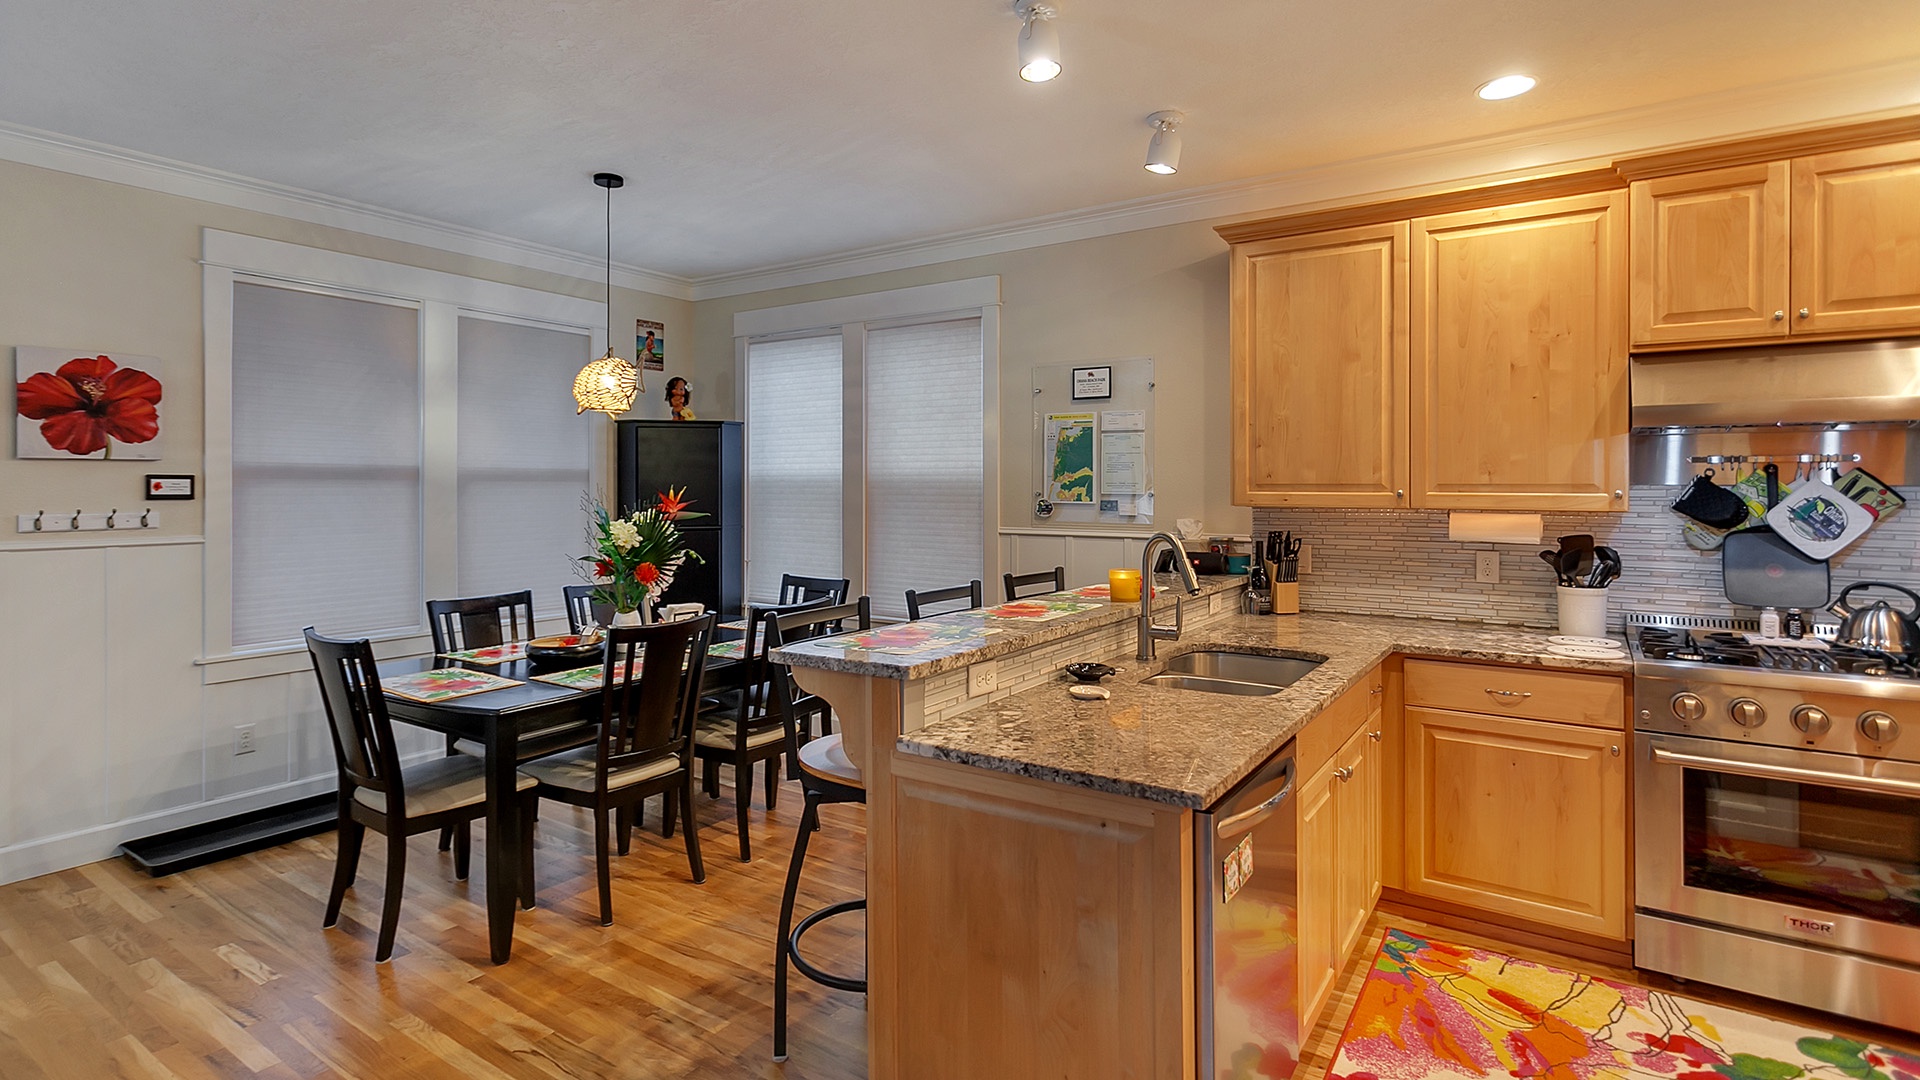 Lincoln City Vacation Rentals, Ohana Beach Park - Entertain while you prepare your meals in the open-concept common spaces